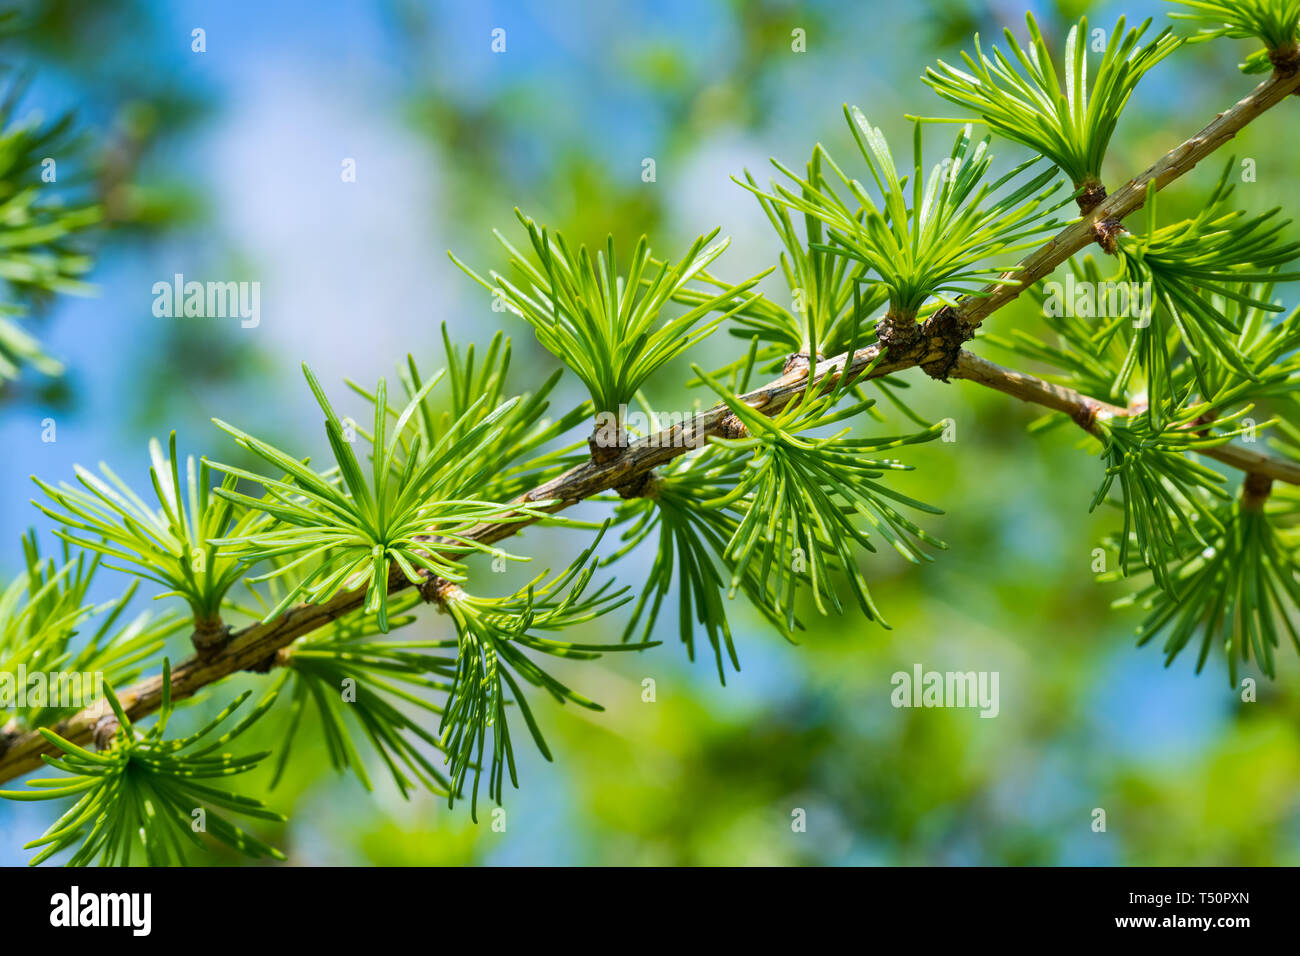 European larch branch. Spring sky, foliage detail. Larix decidua. Light green needle-like leaves. Young evergreen deciduous tree. Playful leaf cluster. Stock Photo